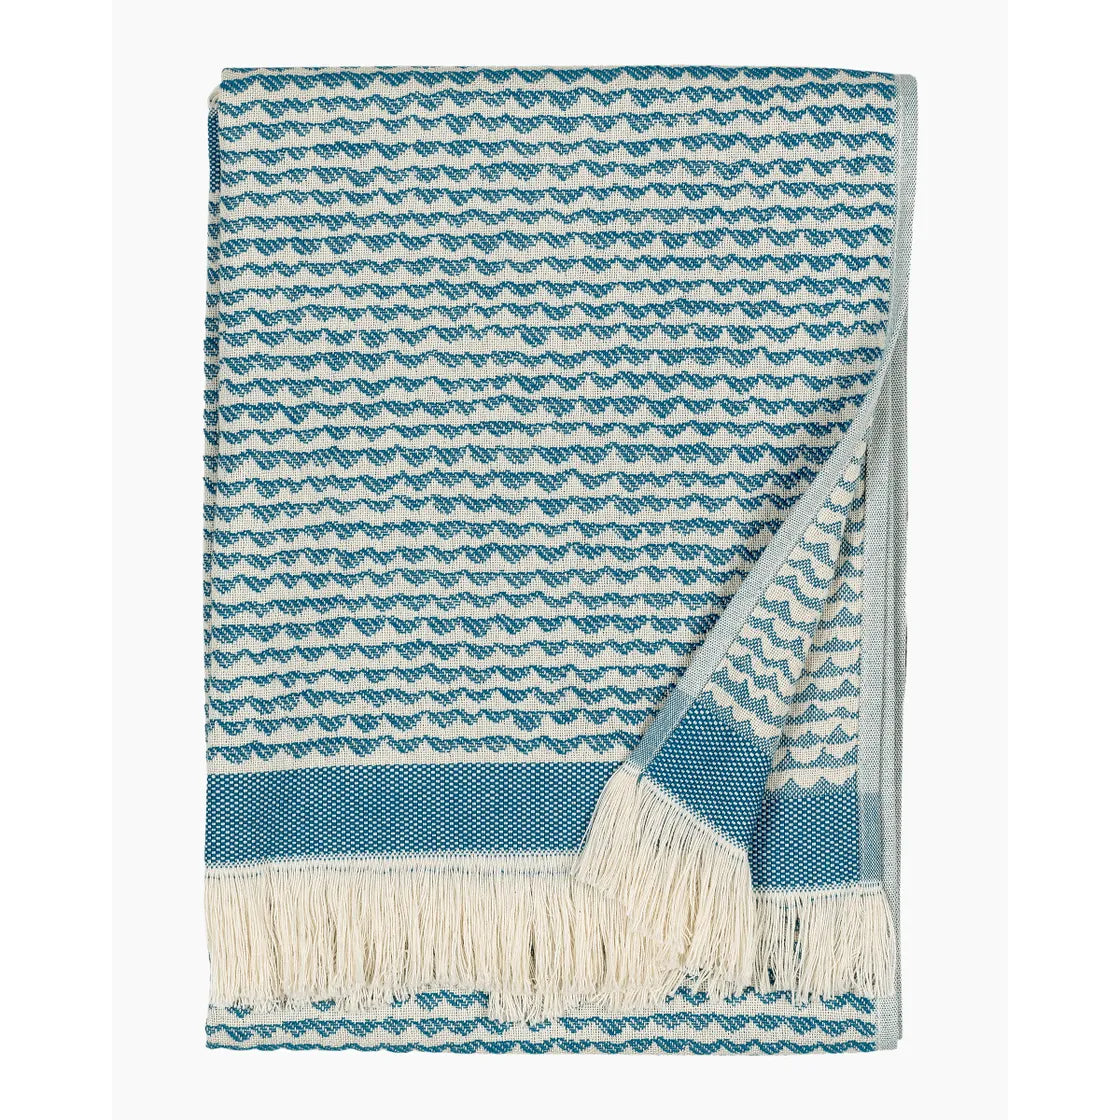 Papajo hand towel 50x100cm off white / turquoise 071544 170